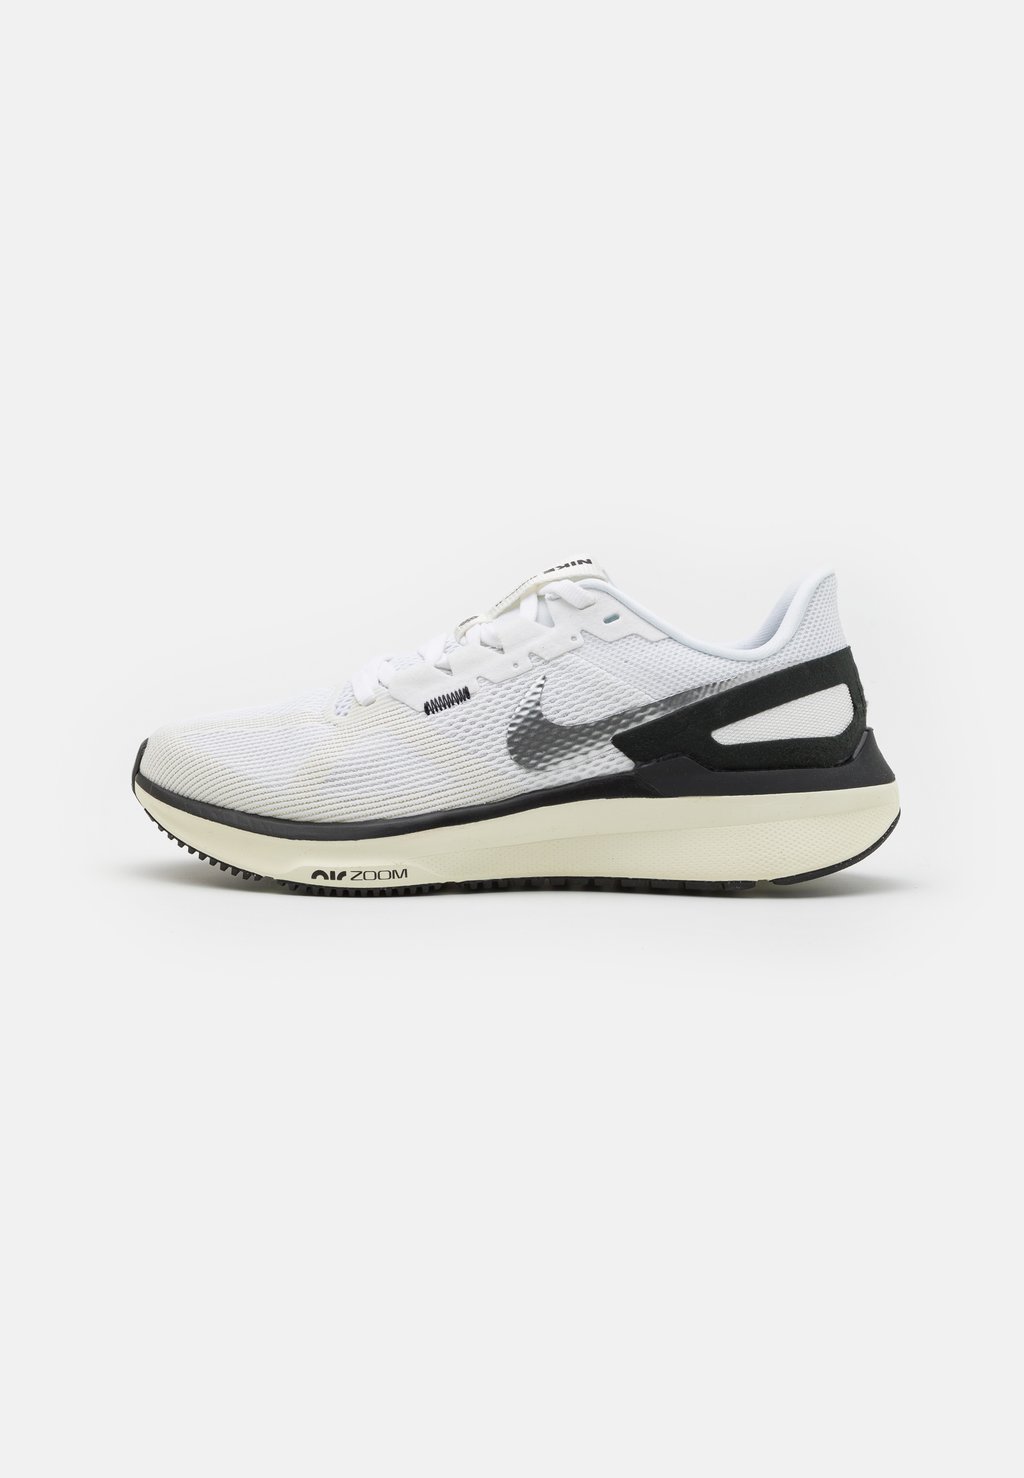 Кроссовки Stability AIR ZOOM STRUCTURE 25 Nike, цвет white/black/sail/coconut milk/team red/metallic silver